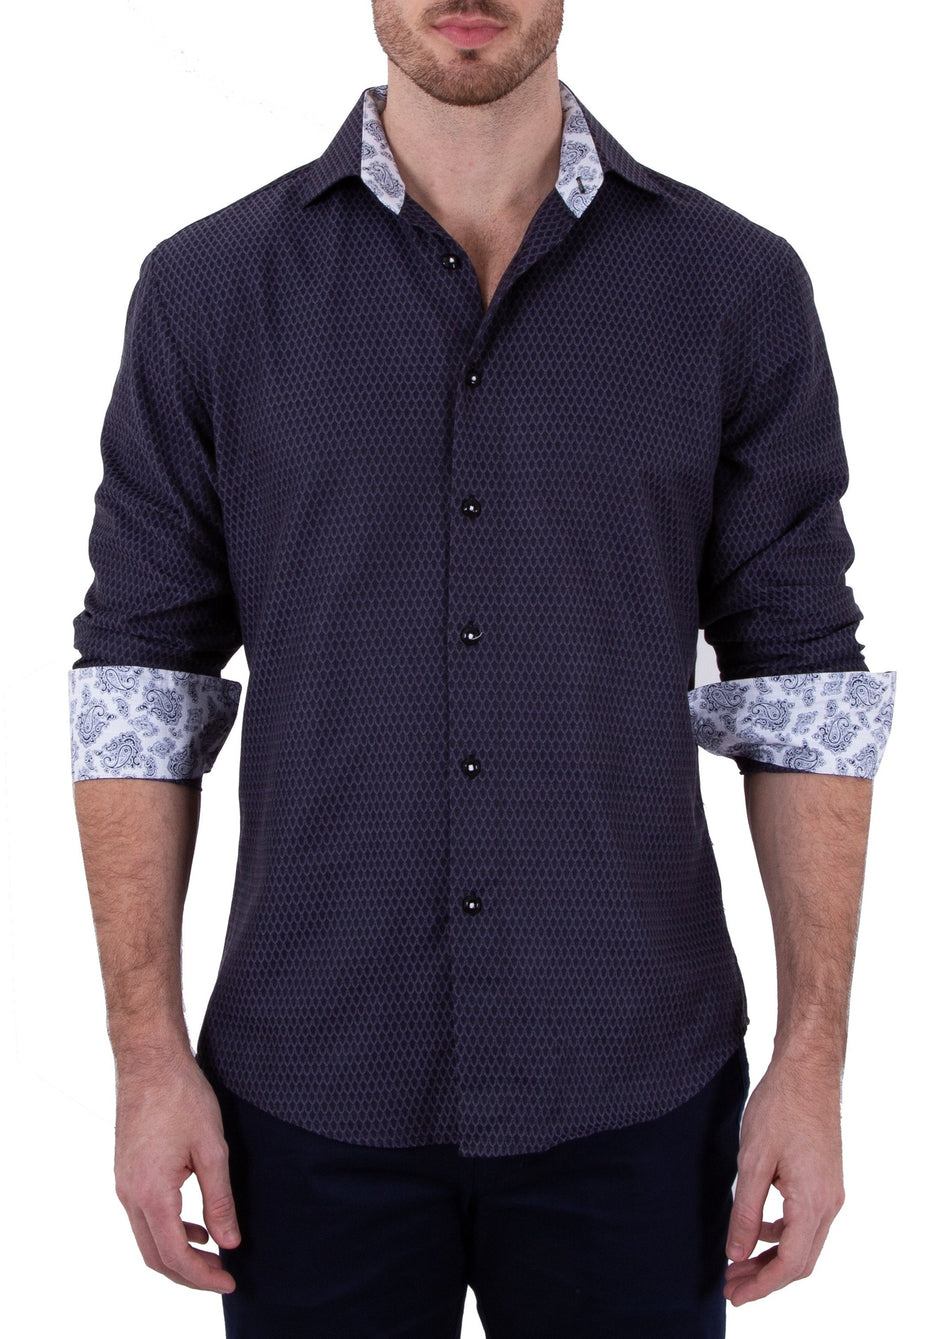 Men's Black Long Sleeve with Paisley Cuffs